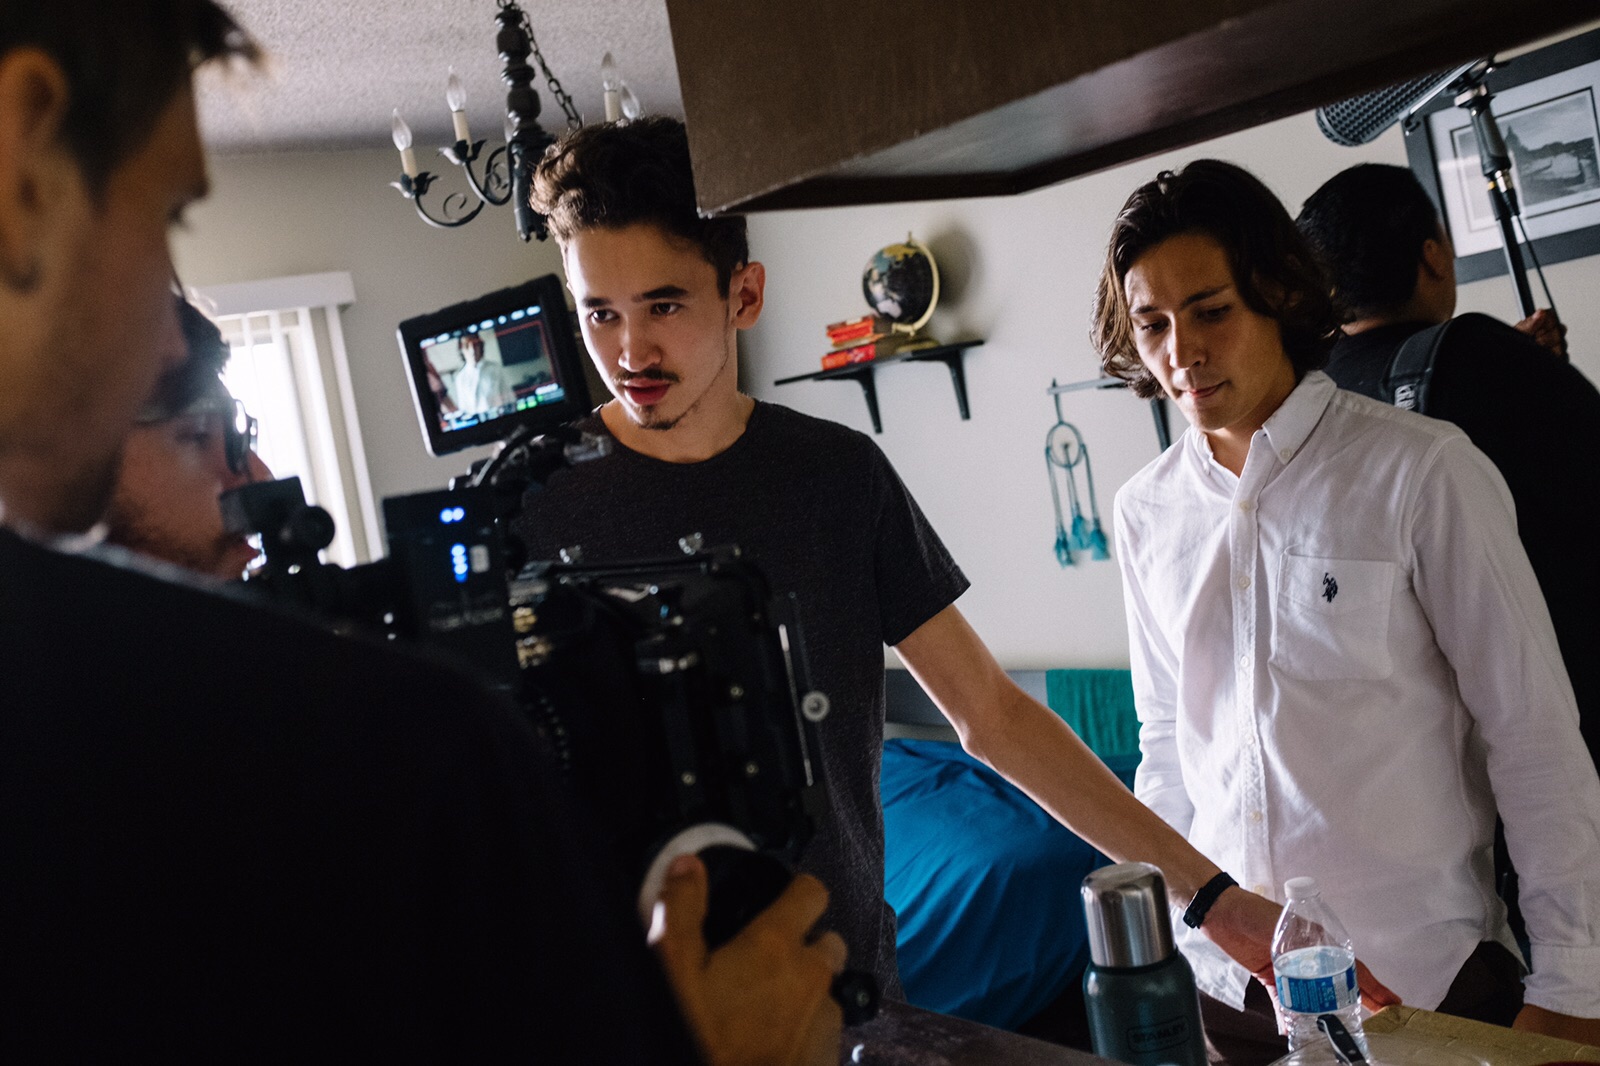 Anatoliy Ogay on set with Medet Shayahmetov, director of Brothers.